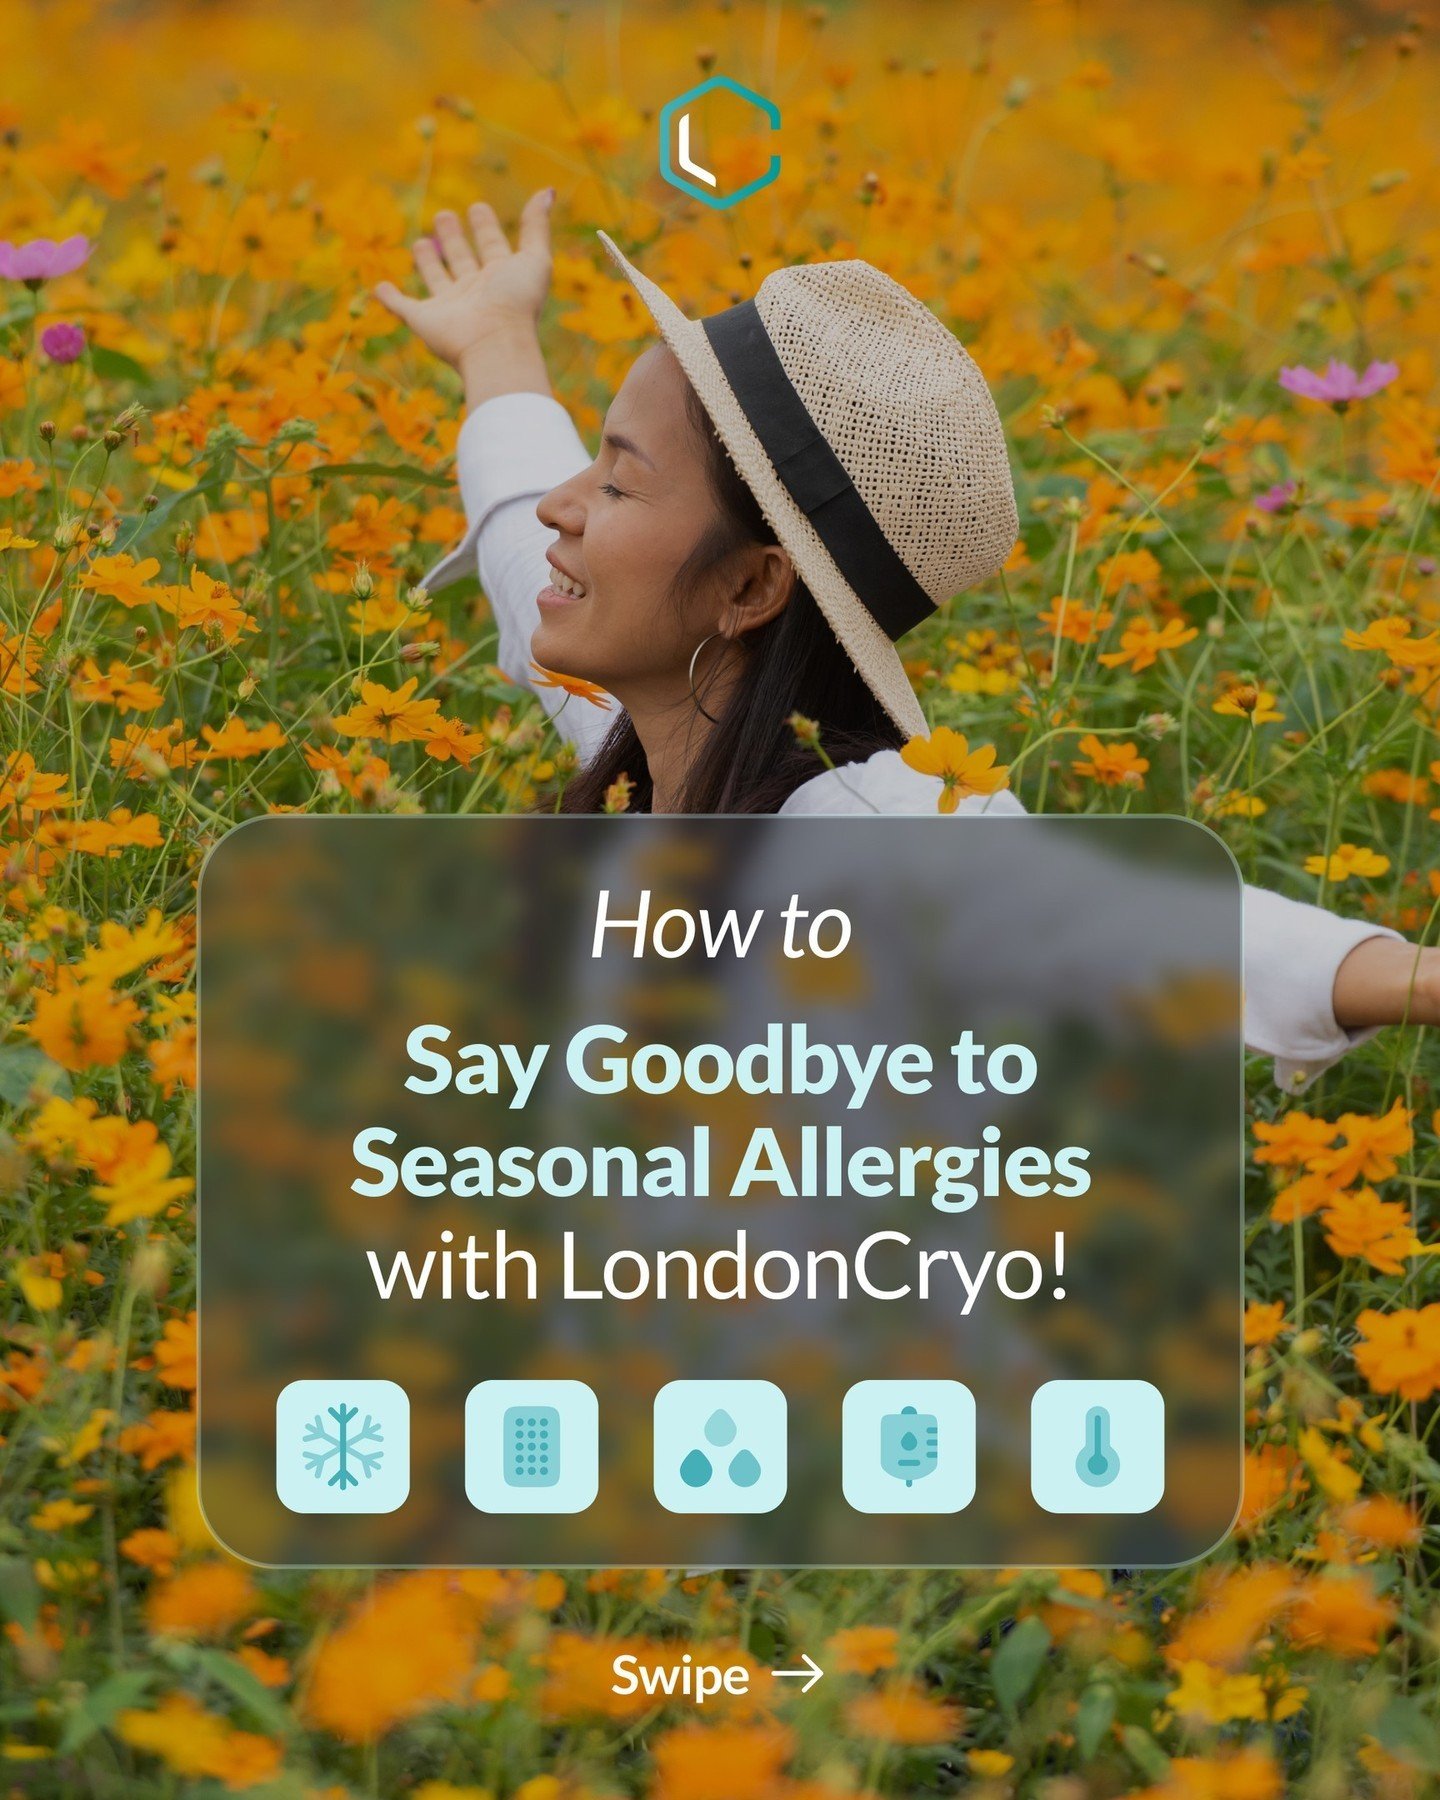 Combat seasonal allergies with LondonCryo's services! ❄️⁠
⁠
Reduce inflammation and boost immunity with Cryotherapy, promote healing with Red Light Therapy, relieve congestion with Lymphatic Drainage, replenish nutrients with IV Drips &amp; Shots, an